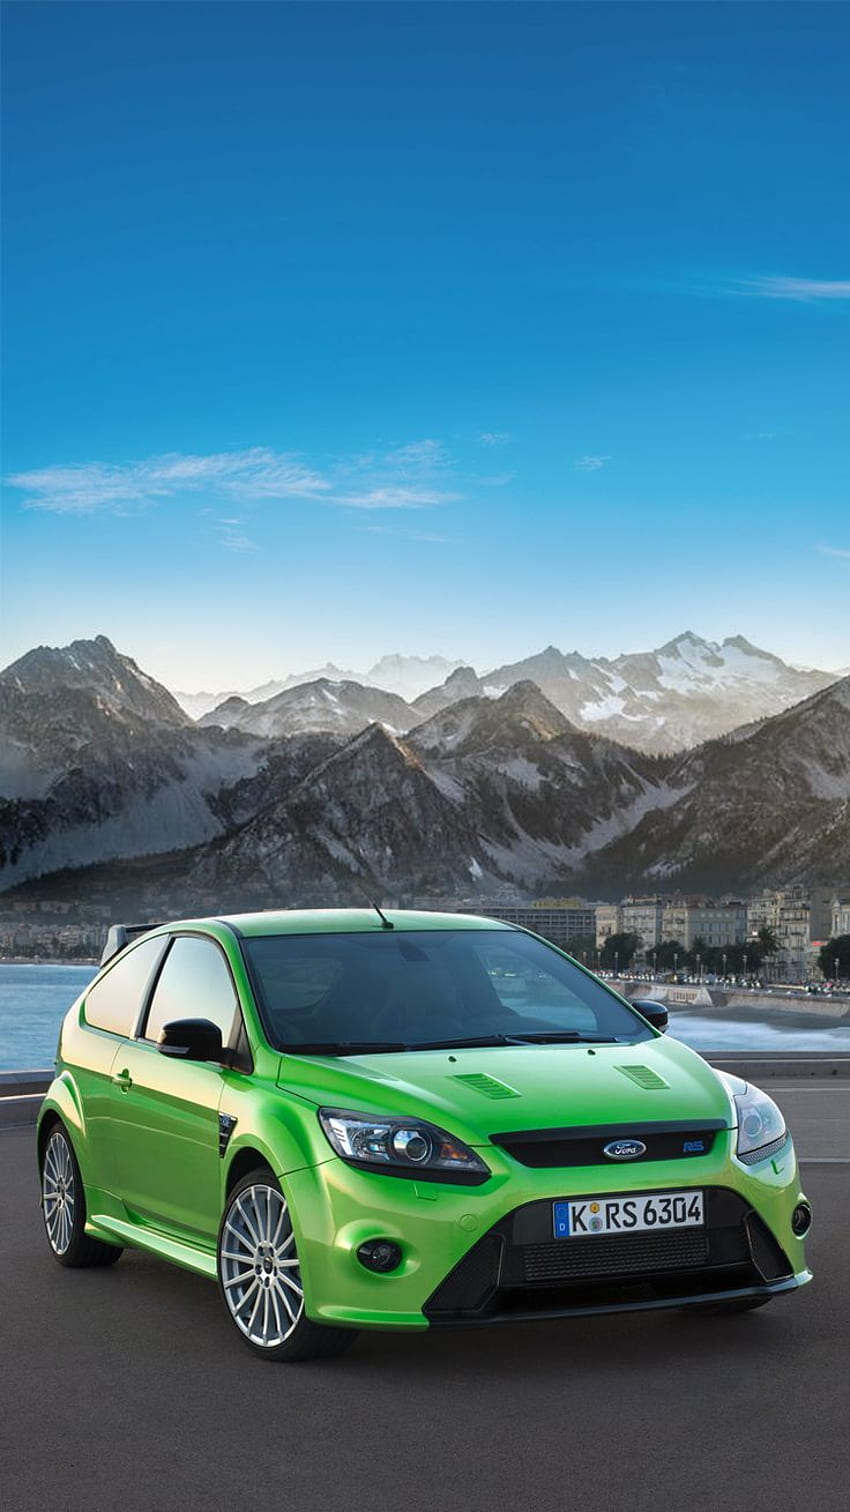 The Classic, Iconic And Eye Catching Ford Focus RS Mk 2.5 Universal Phone / Background Focus RS Sports. Ford Focus Hatchback, Ford Focus, Ford Focus Rs, Ford Focus Mk2 HD phone wallpaper